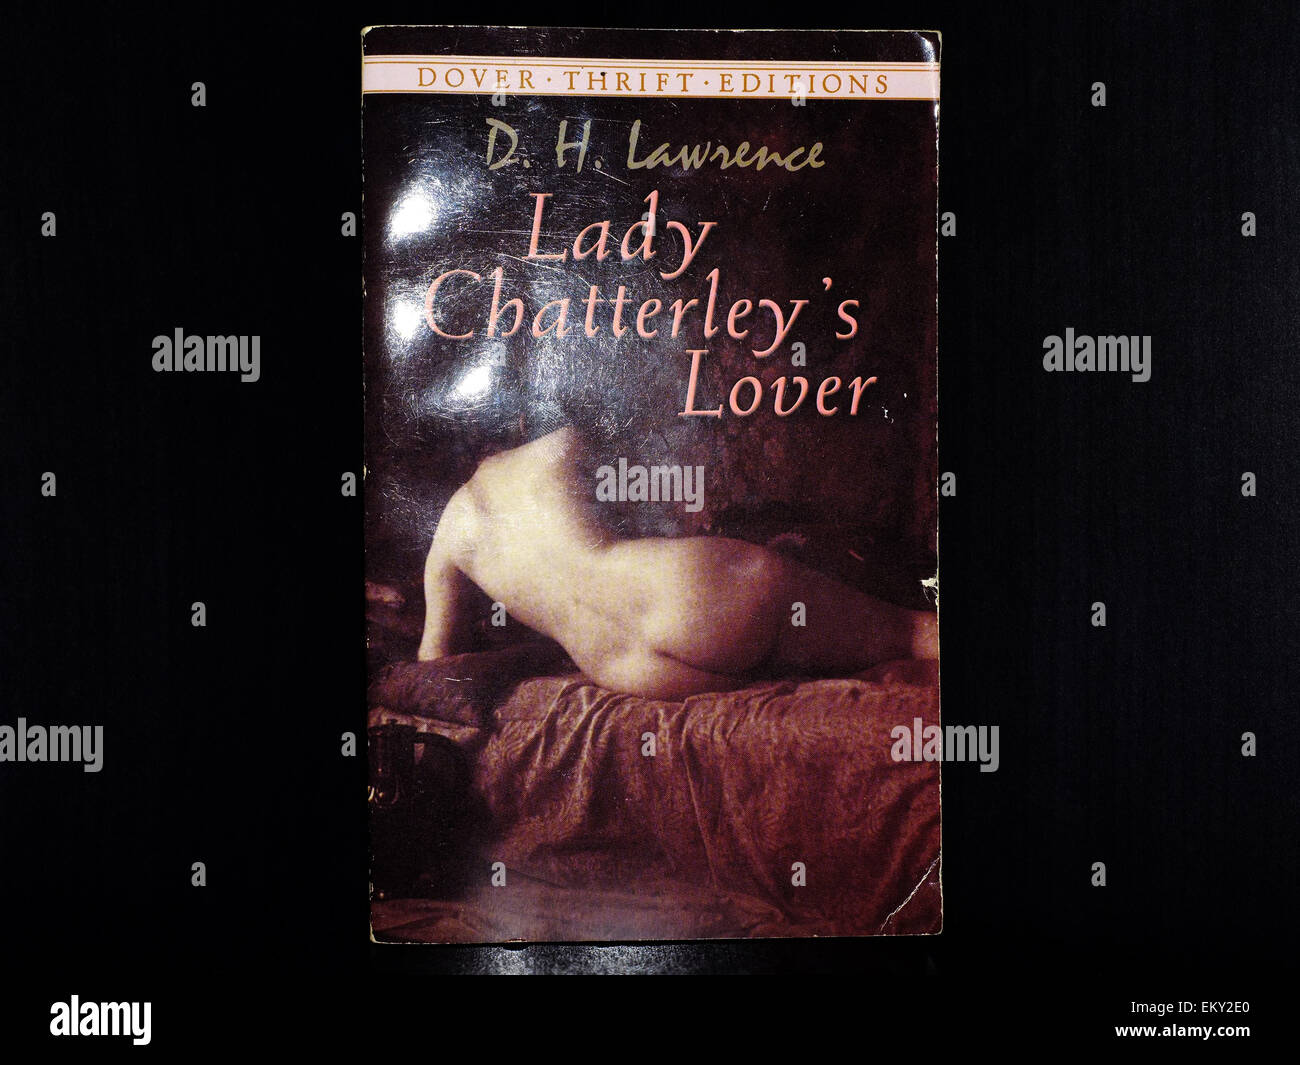 The front cover of Lady Chatterley's Lover by D. H. Lawrence photographed against a black background. Stock Photo